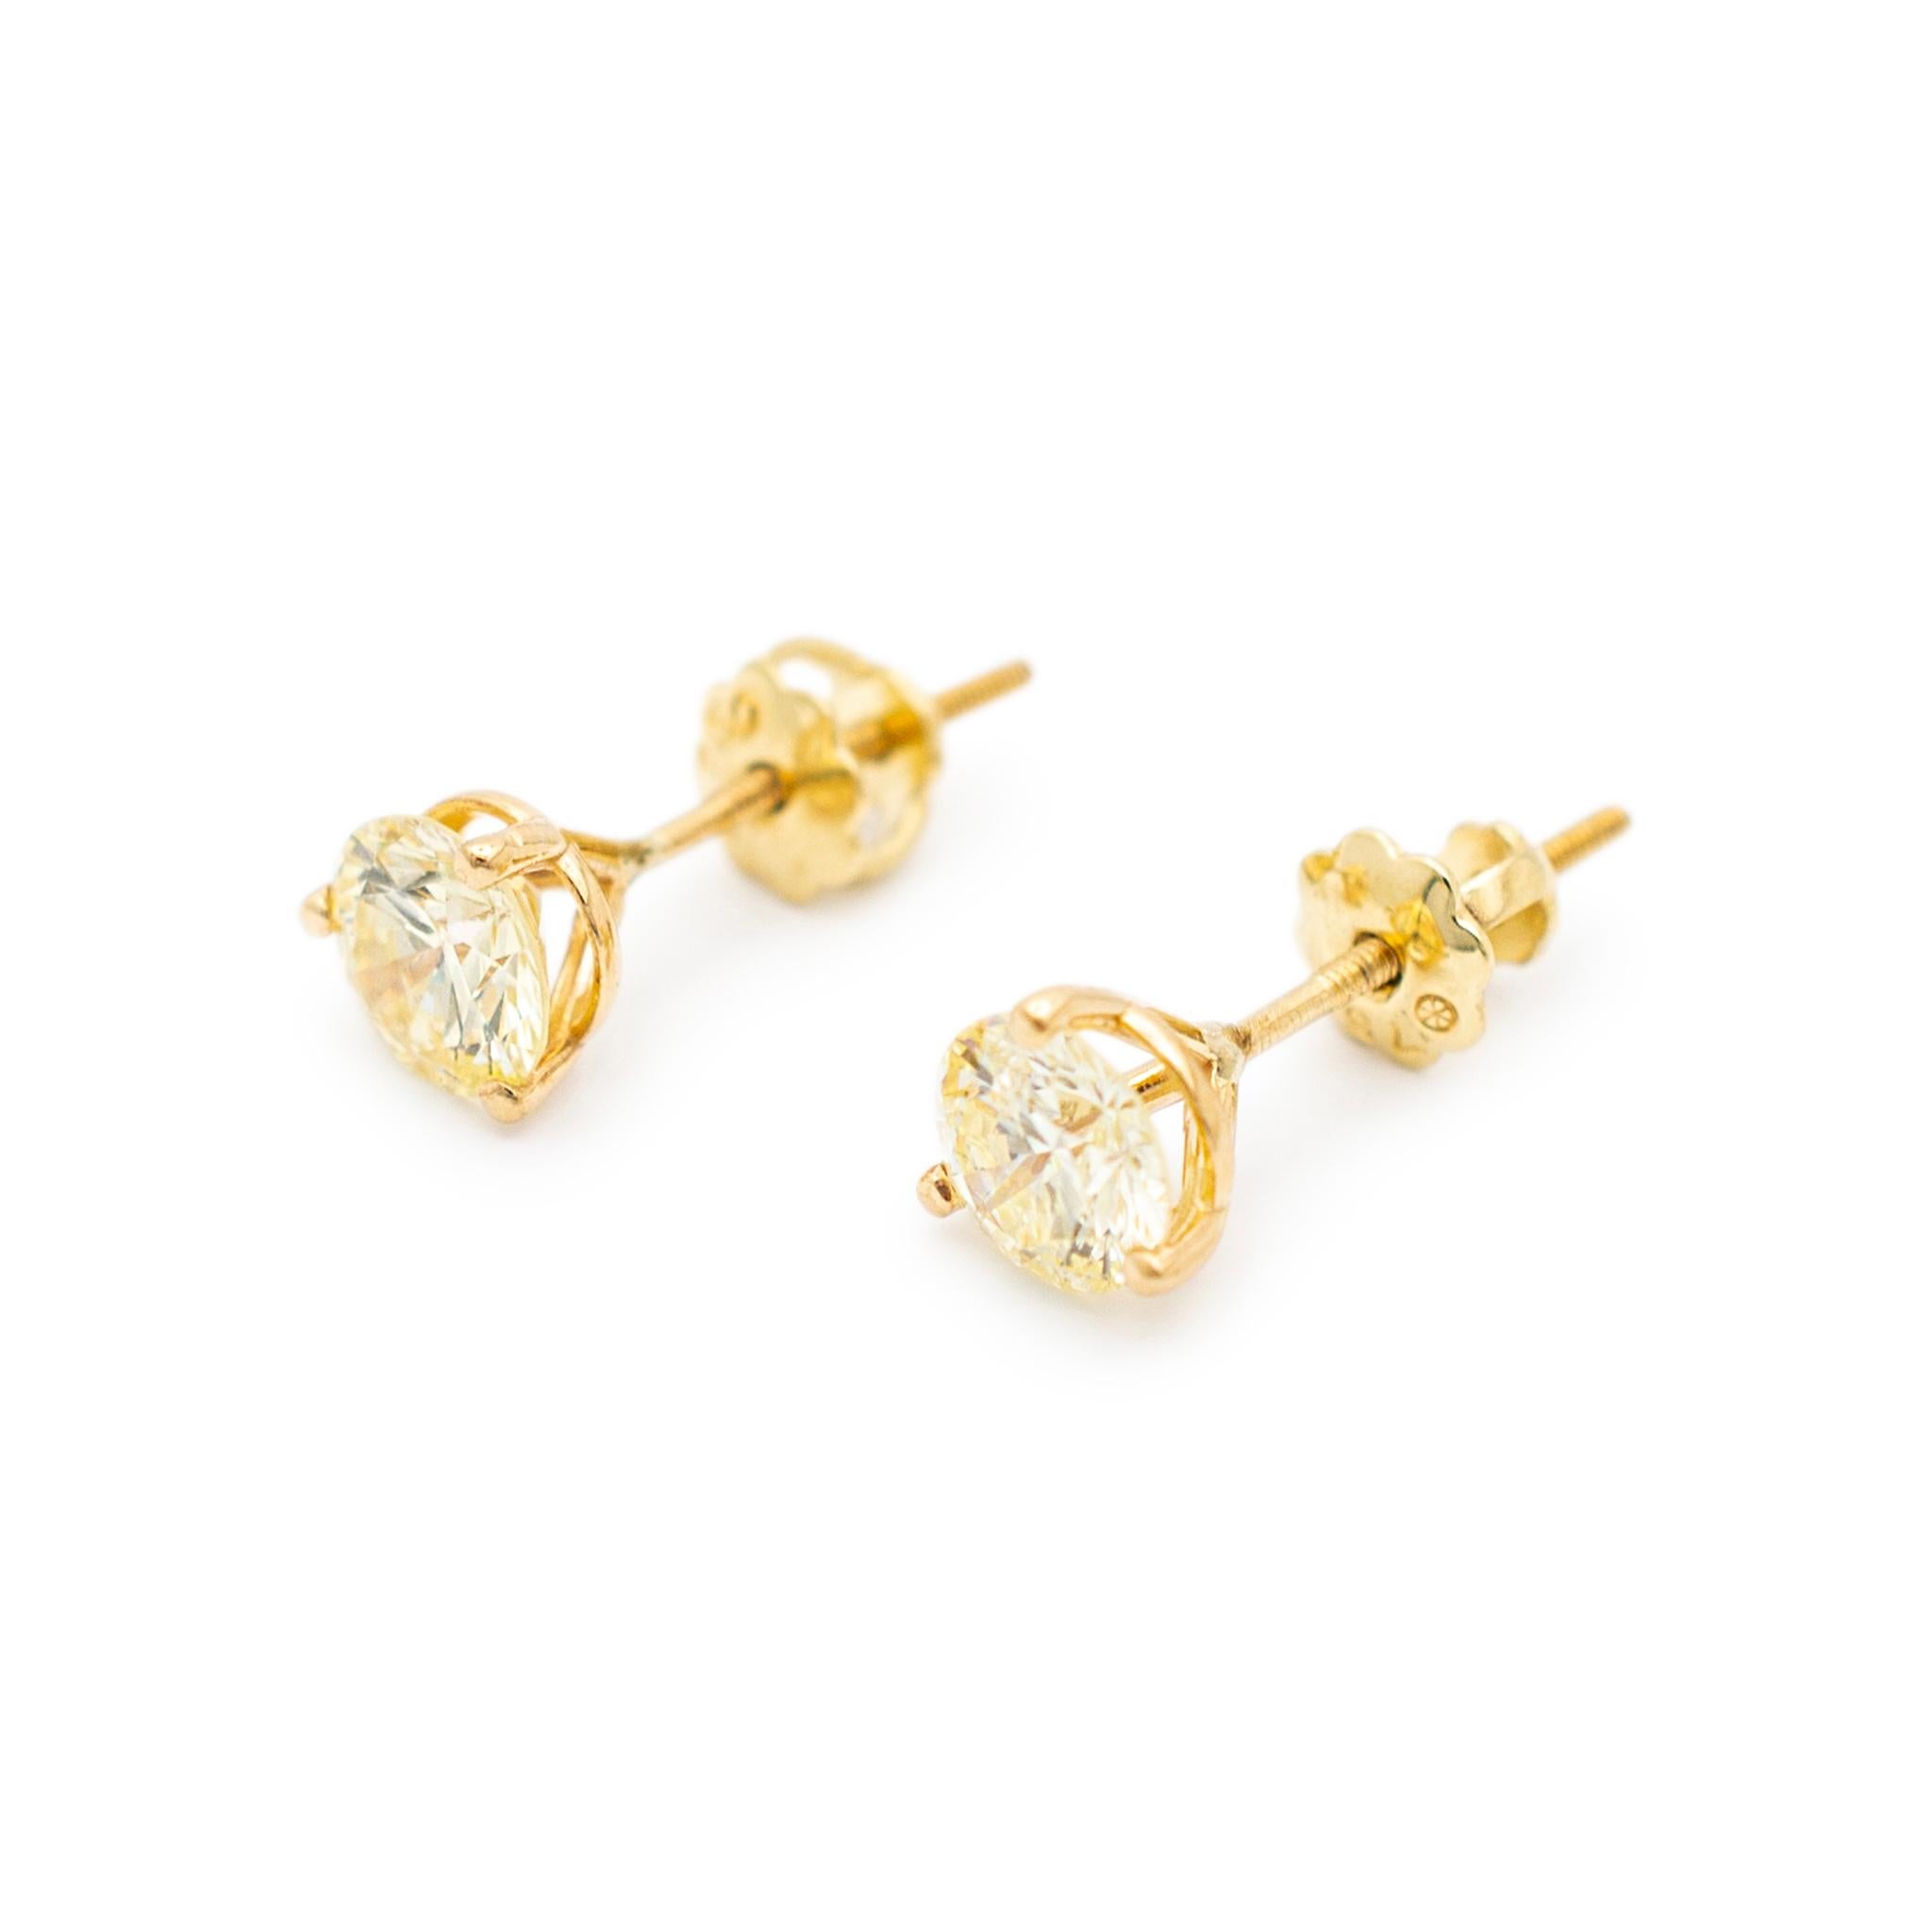 Gender: Ladies

Metal Type: 18K Yellow Gold

Length: 0.50 inches

Diameter: 5.20 mm

Weight: 1.10 grams

18K yellow gold diamond stud earrings with push-on/screw-off backs. The metal was tested and determined to be 18K yellow gold. Engraved with